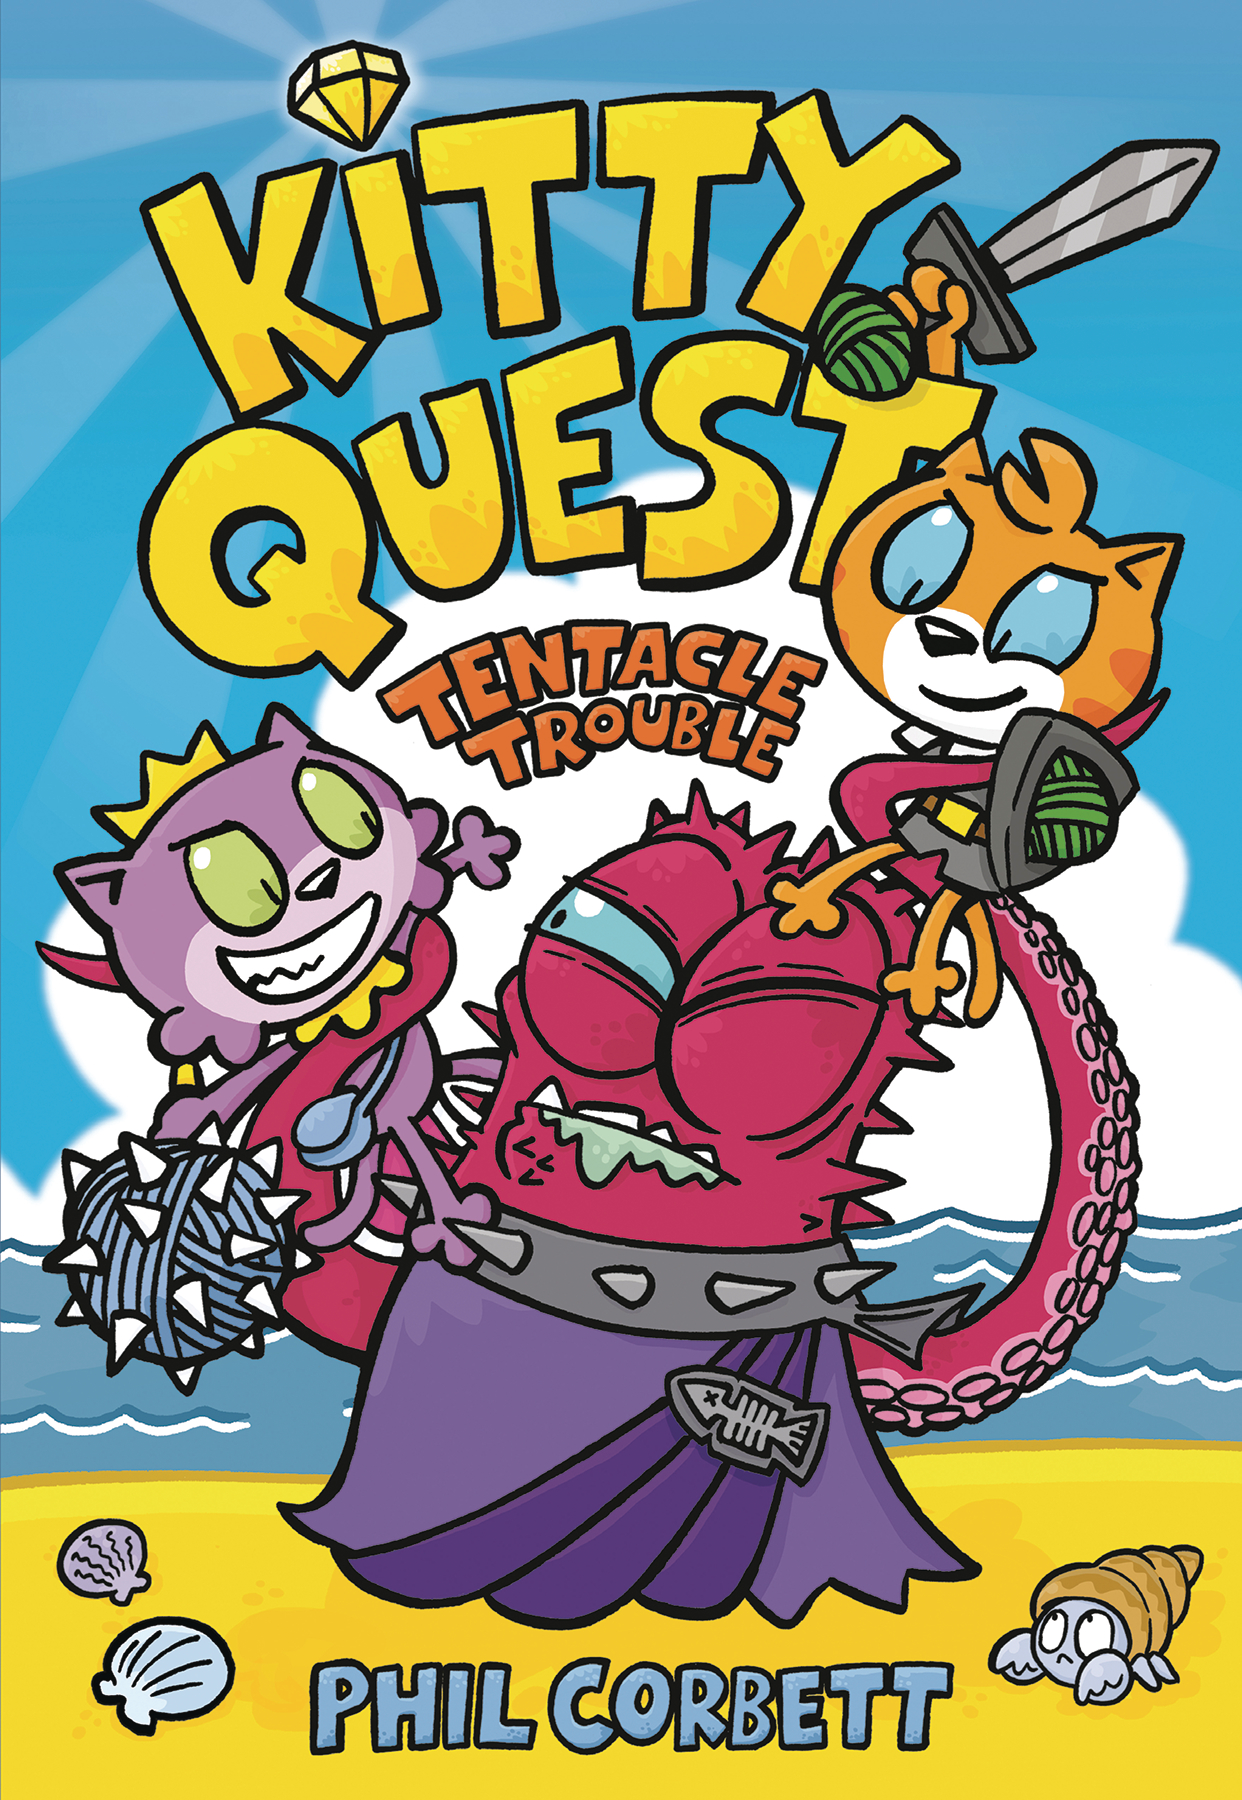 Kitty Quest Graphic Novel Volume 2 Tentacle Trouble